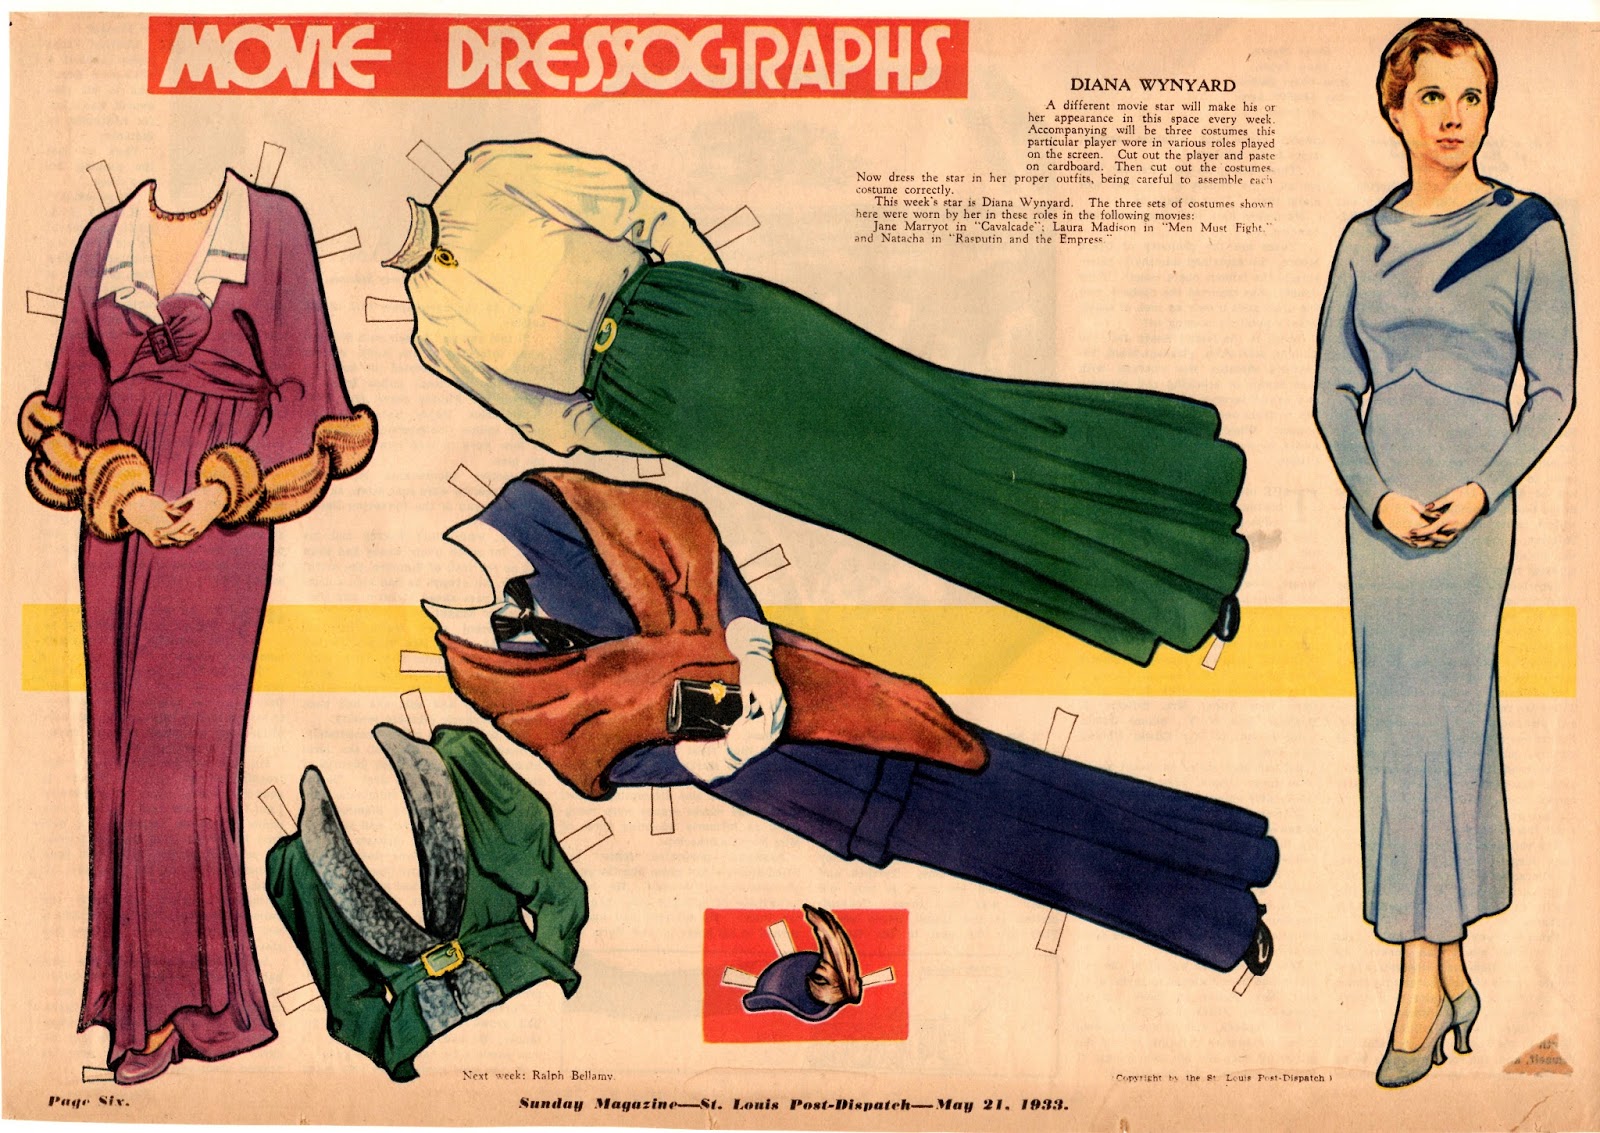 This single page newspaper Movie Dressograph paper doll features the celebr...